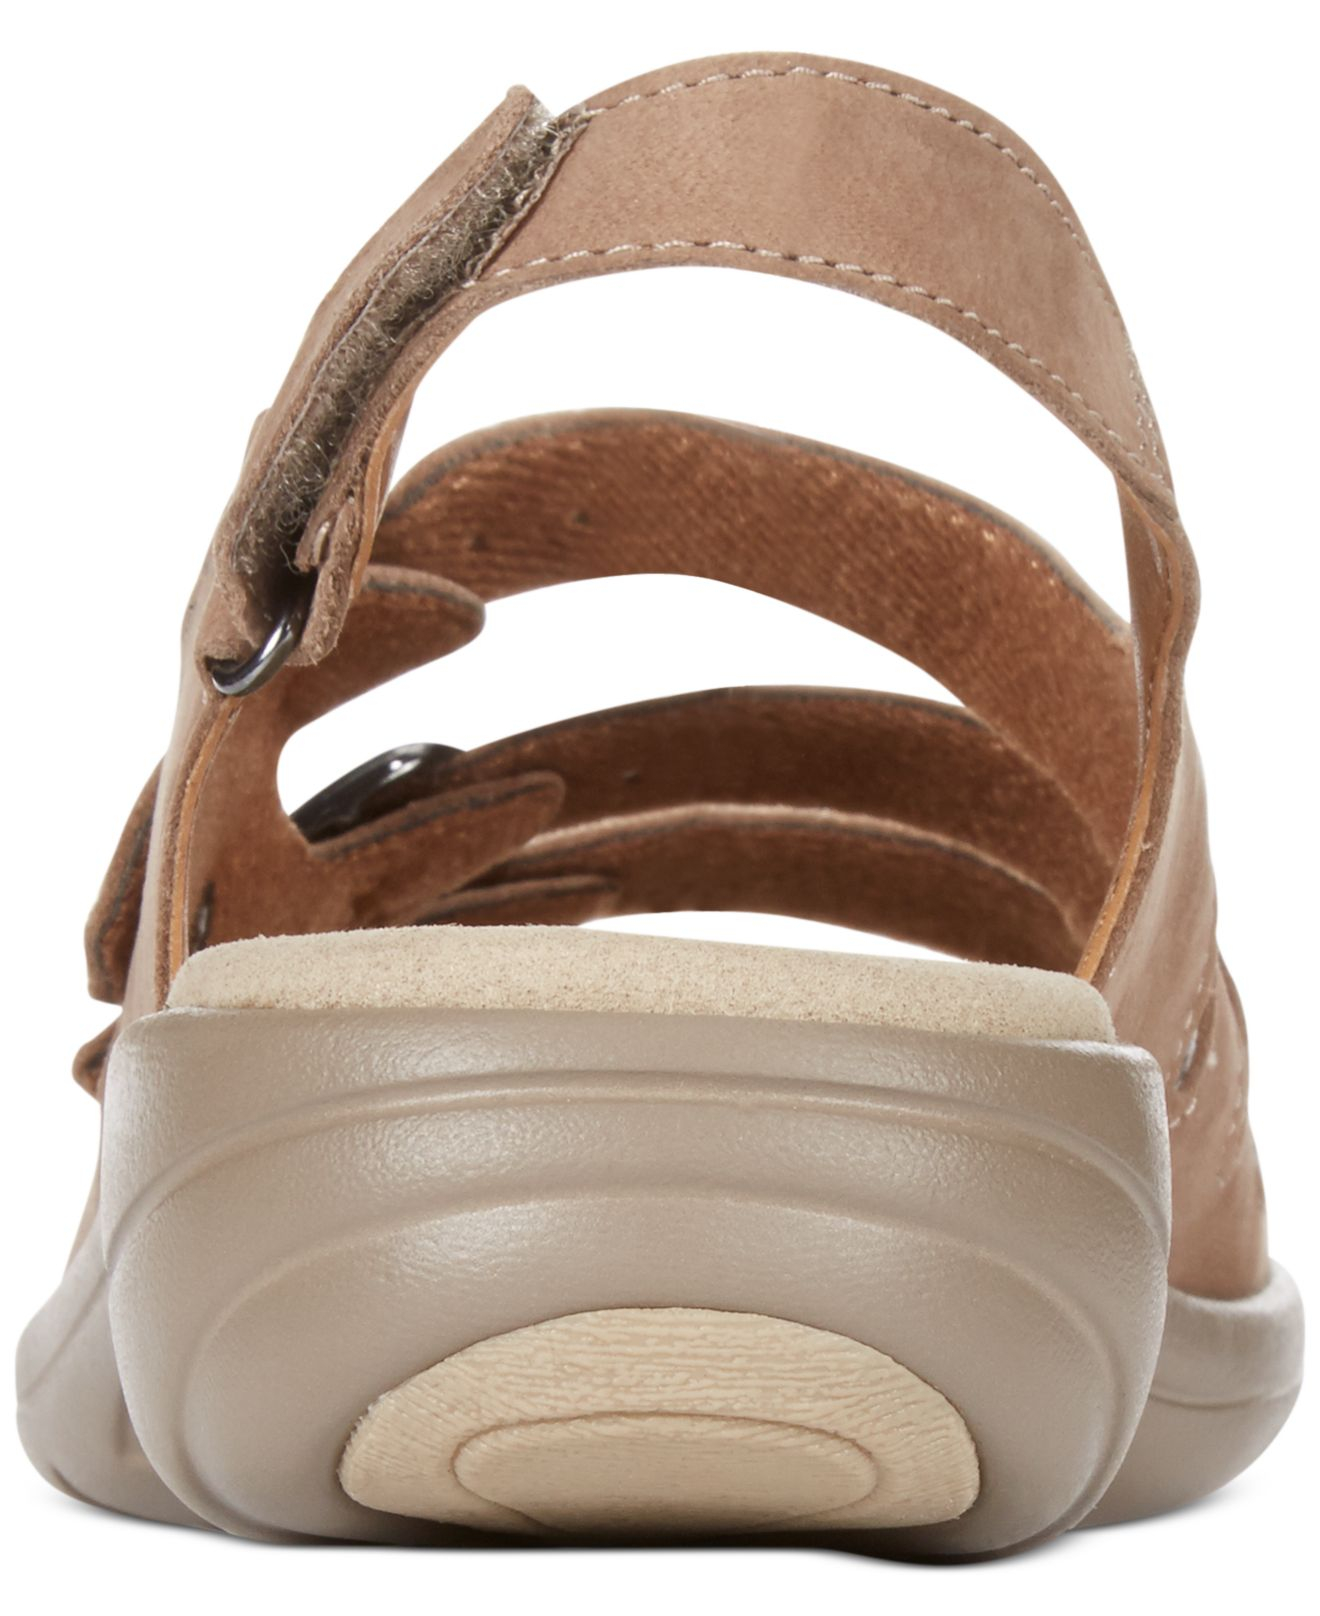 clarks collection women's saylie medway flat sandals